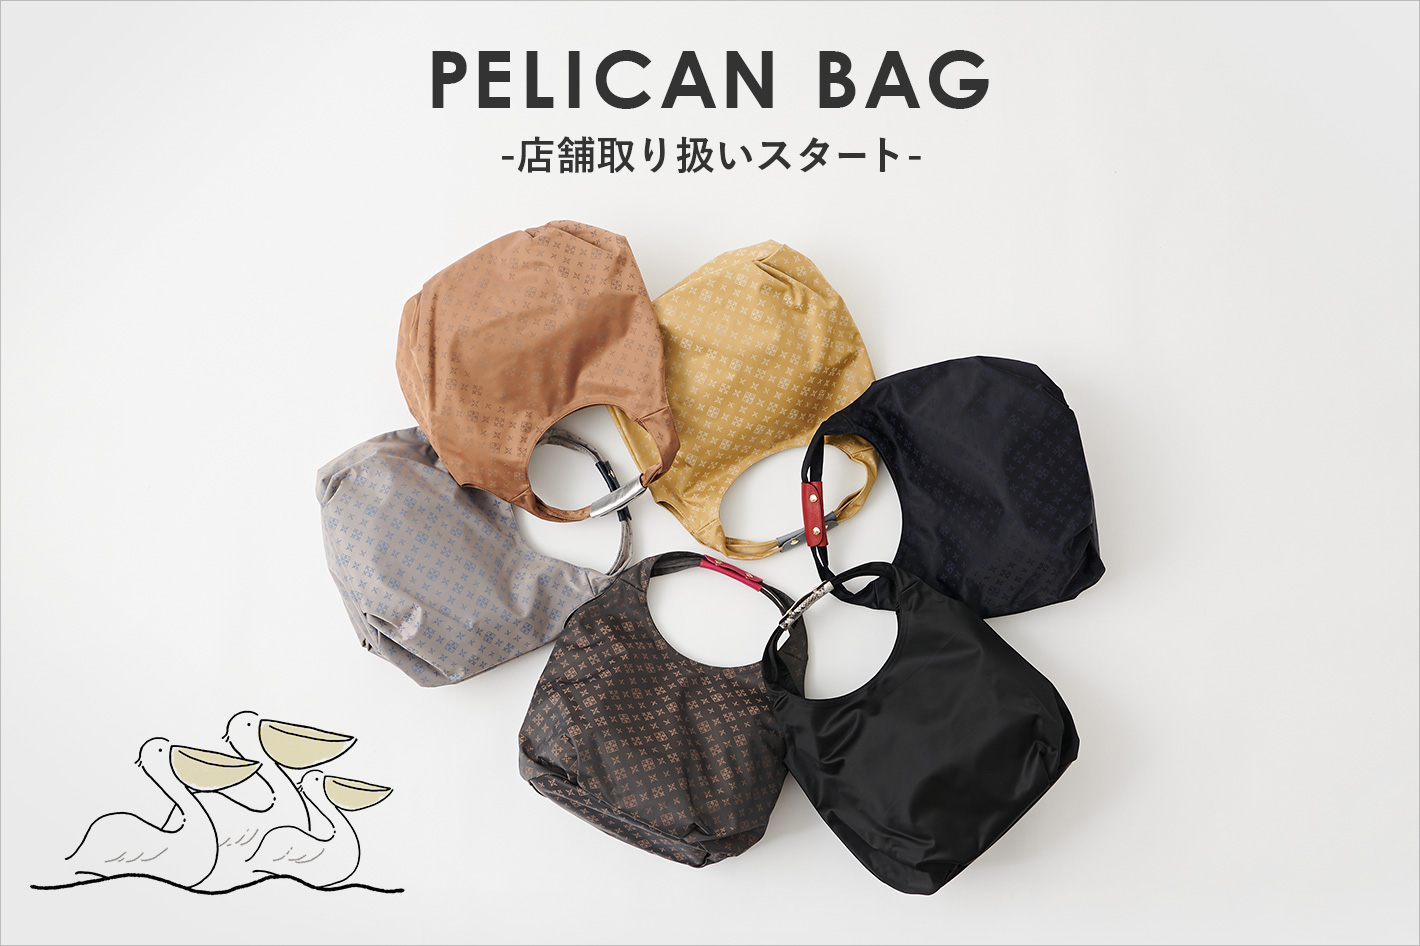 ◇New Arrival◇ペリカンバッグがアップデートして店舗取り扱い 